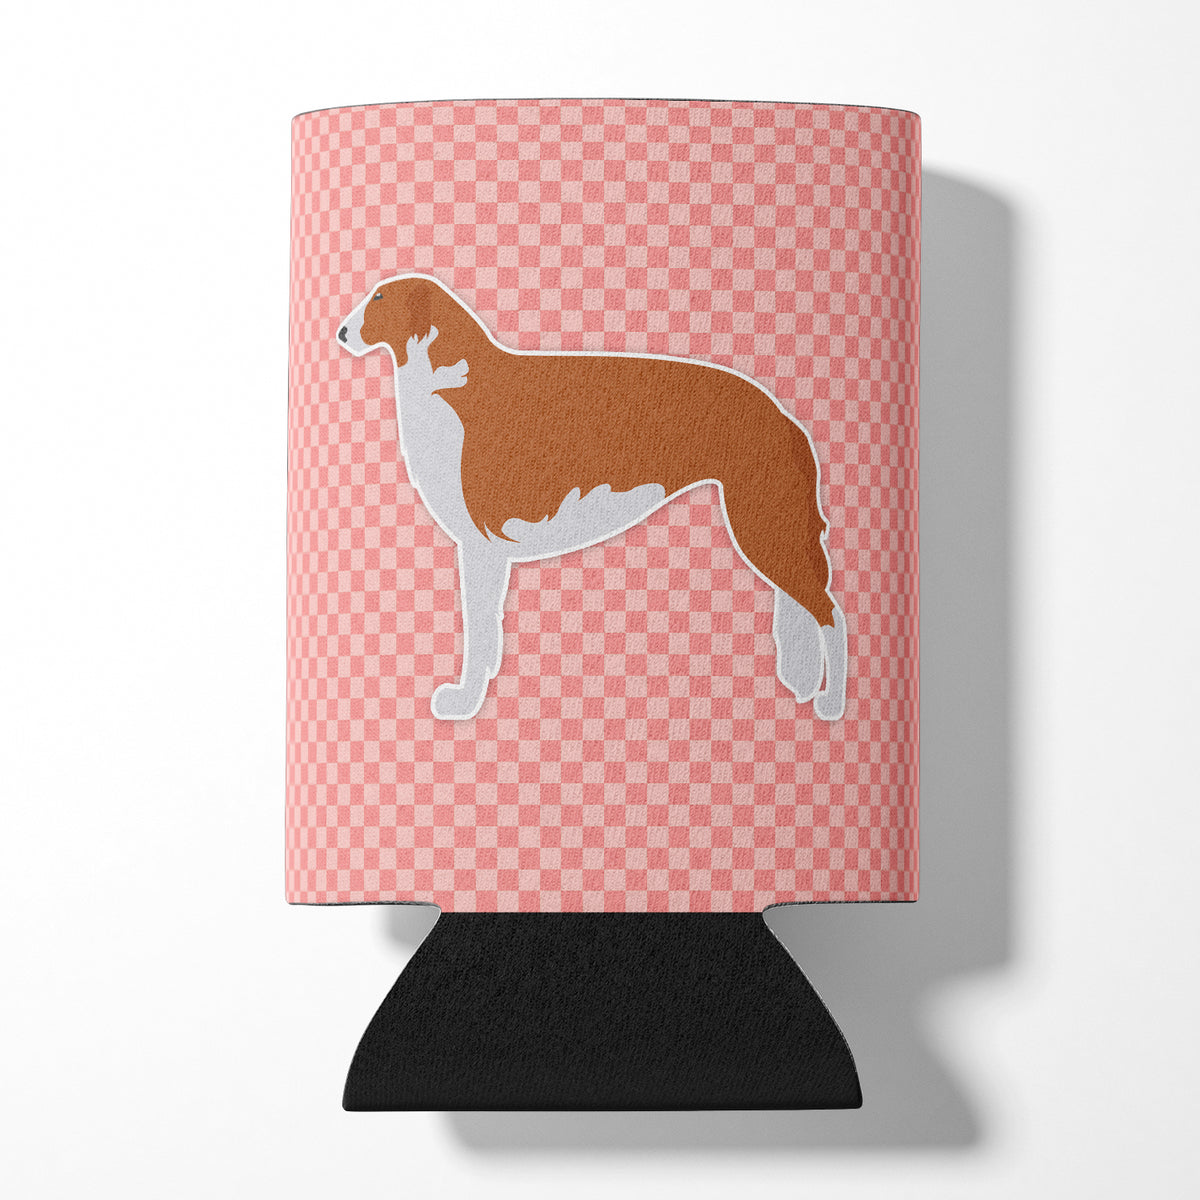 Borzoi Russian Greyhound Checkerboard Pink Can or Bottle Hugger BB3599CC